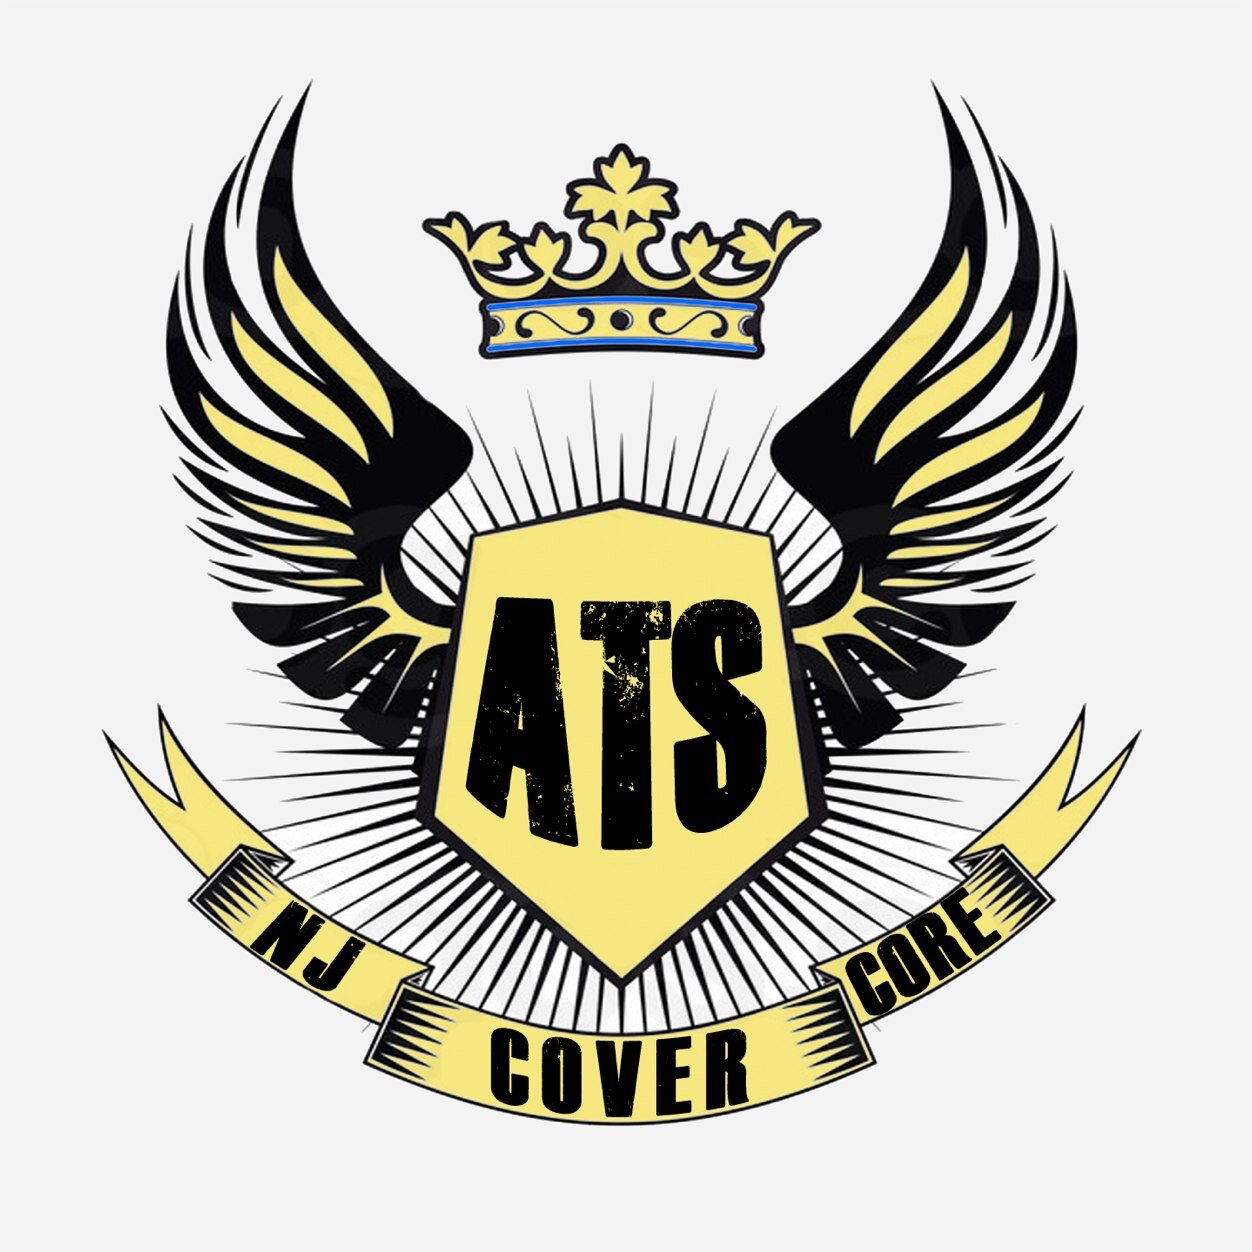 ATS is your ultimate scene / variety cover band based out of Bergen county NJ ... We play music for people who appreciate music... Come Follow Us!!